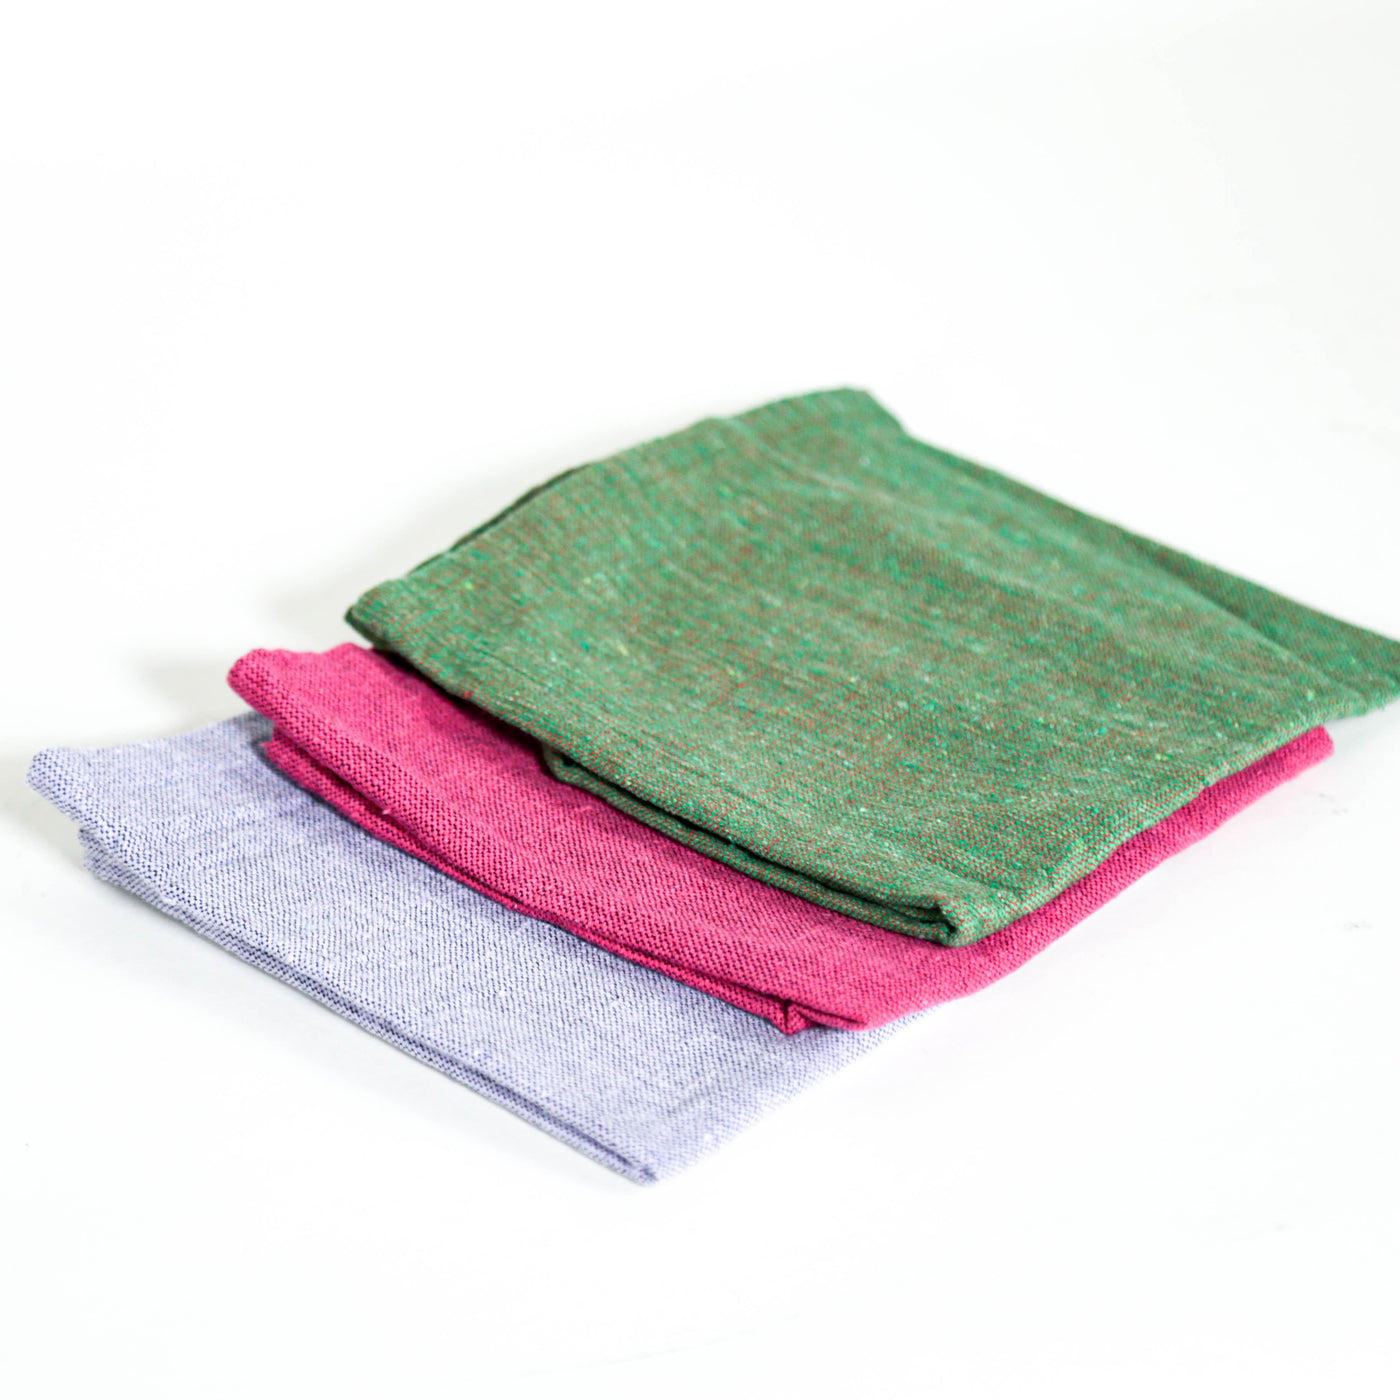 Oaxaca Colorful Napkins for your home decor